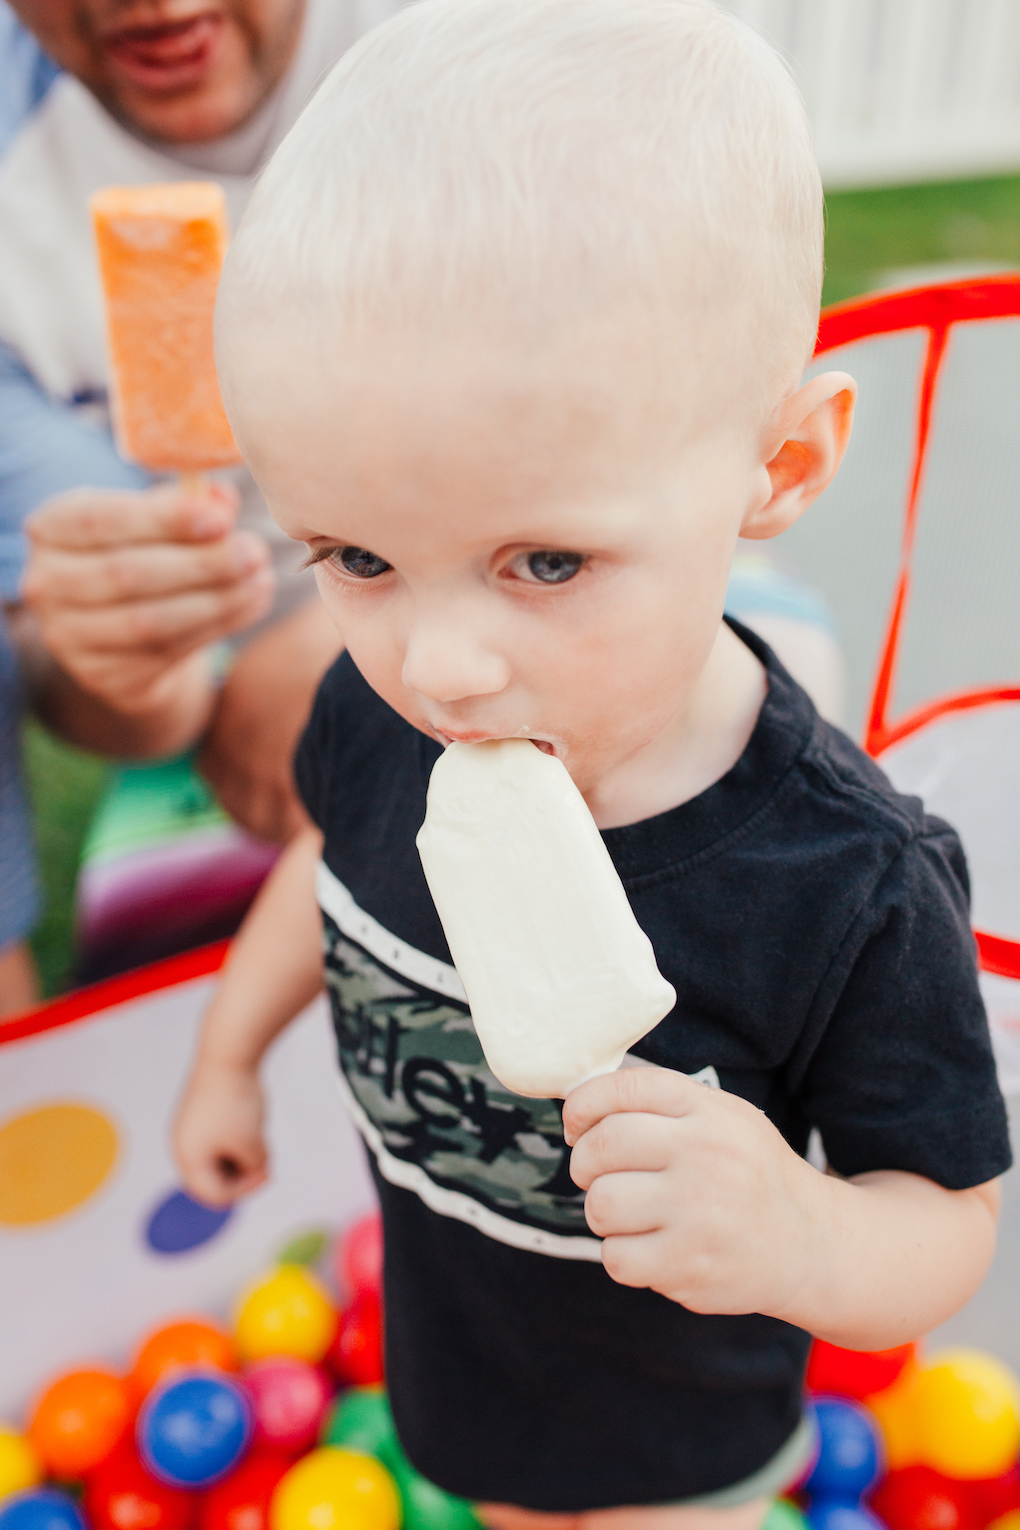 KINGS HAPPY UN-BIRTHDAY - KIDS BALL PARTY by Utah blogger Dani Marie - Little boy in Hurley shirt eating Lick'd Popsicle